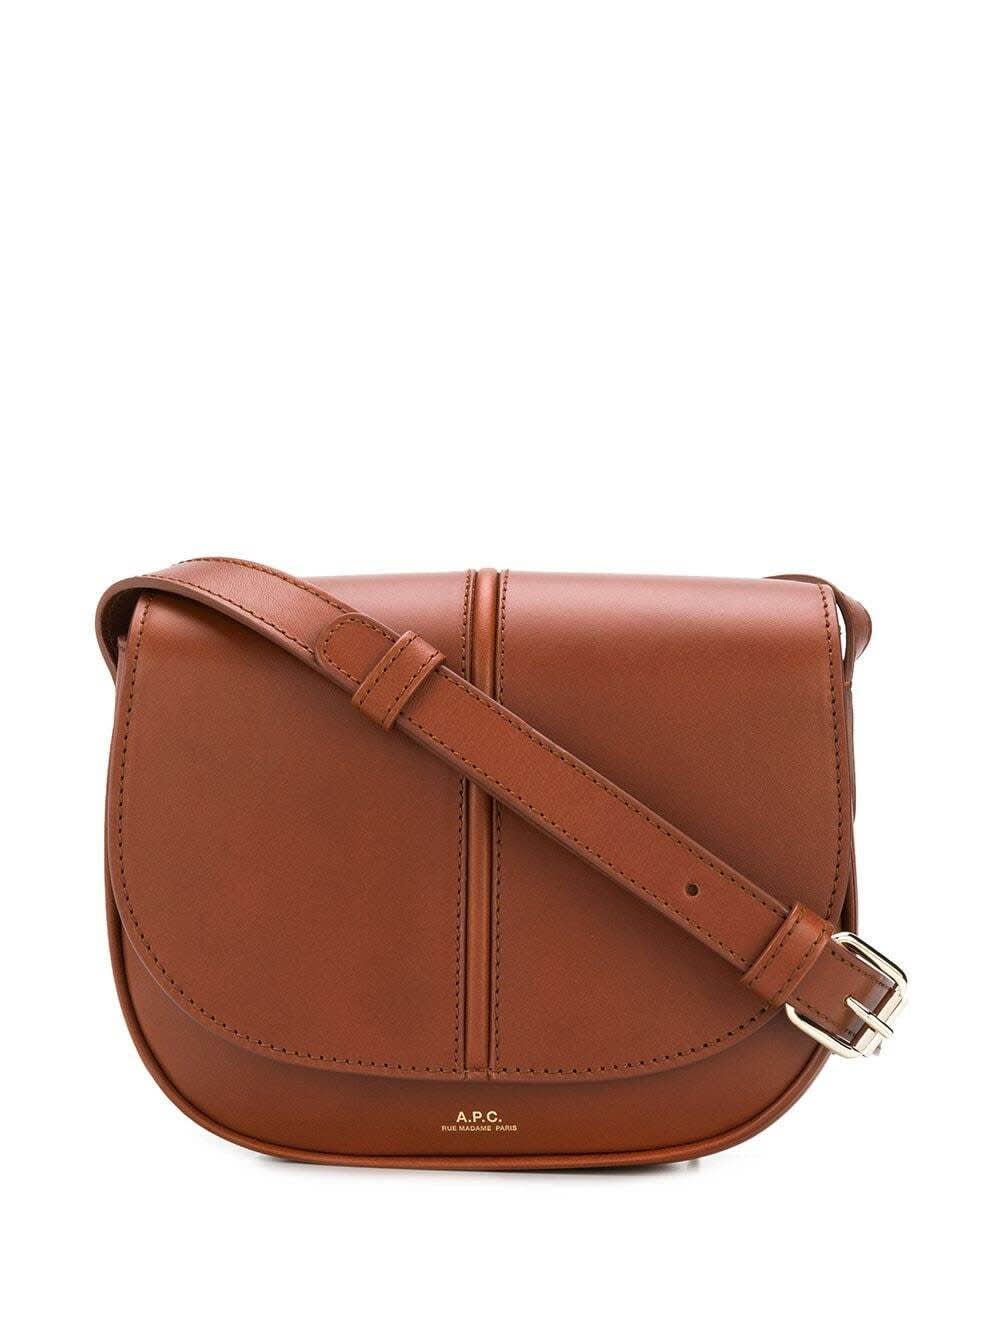 A.P.C. Sac Demi Lune Crossbody Bag In Brown Leather With Logo